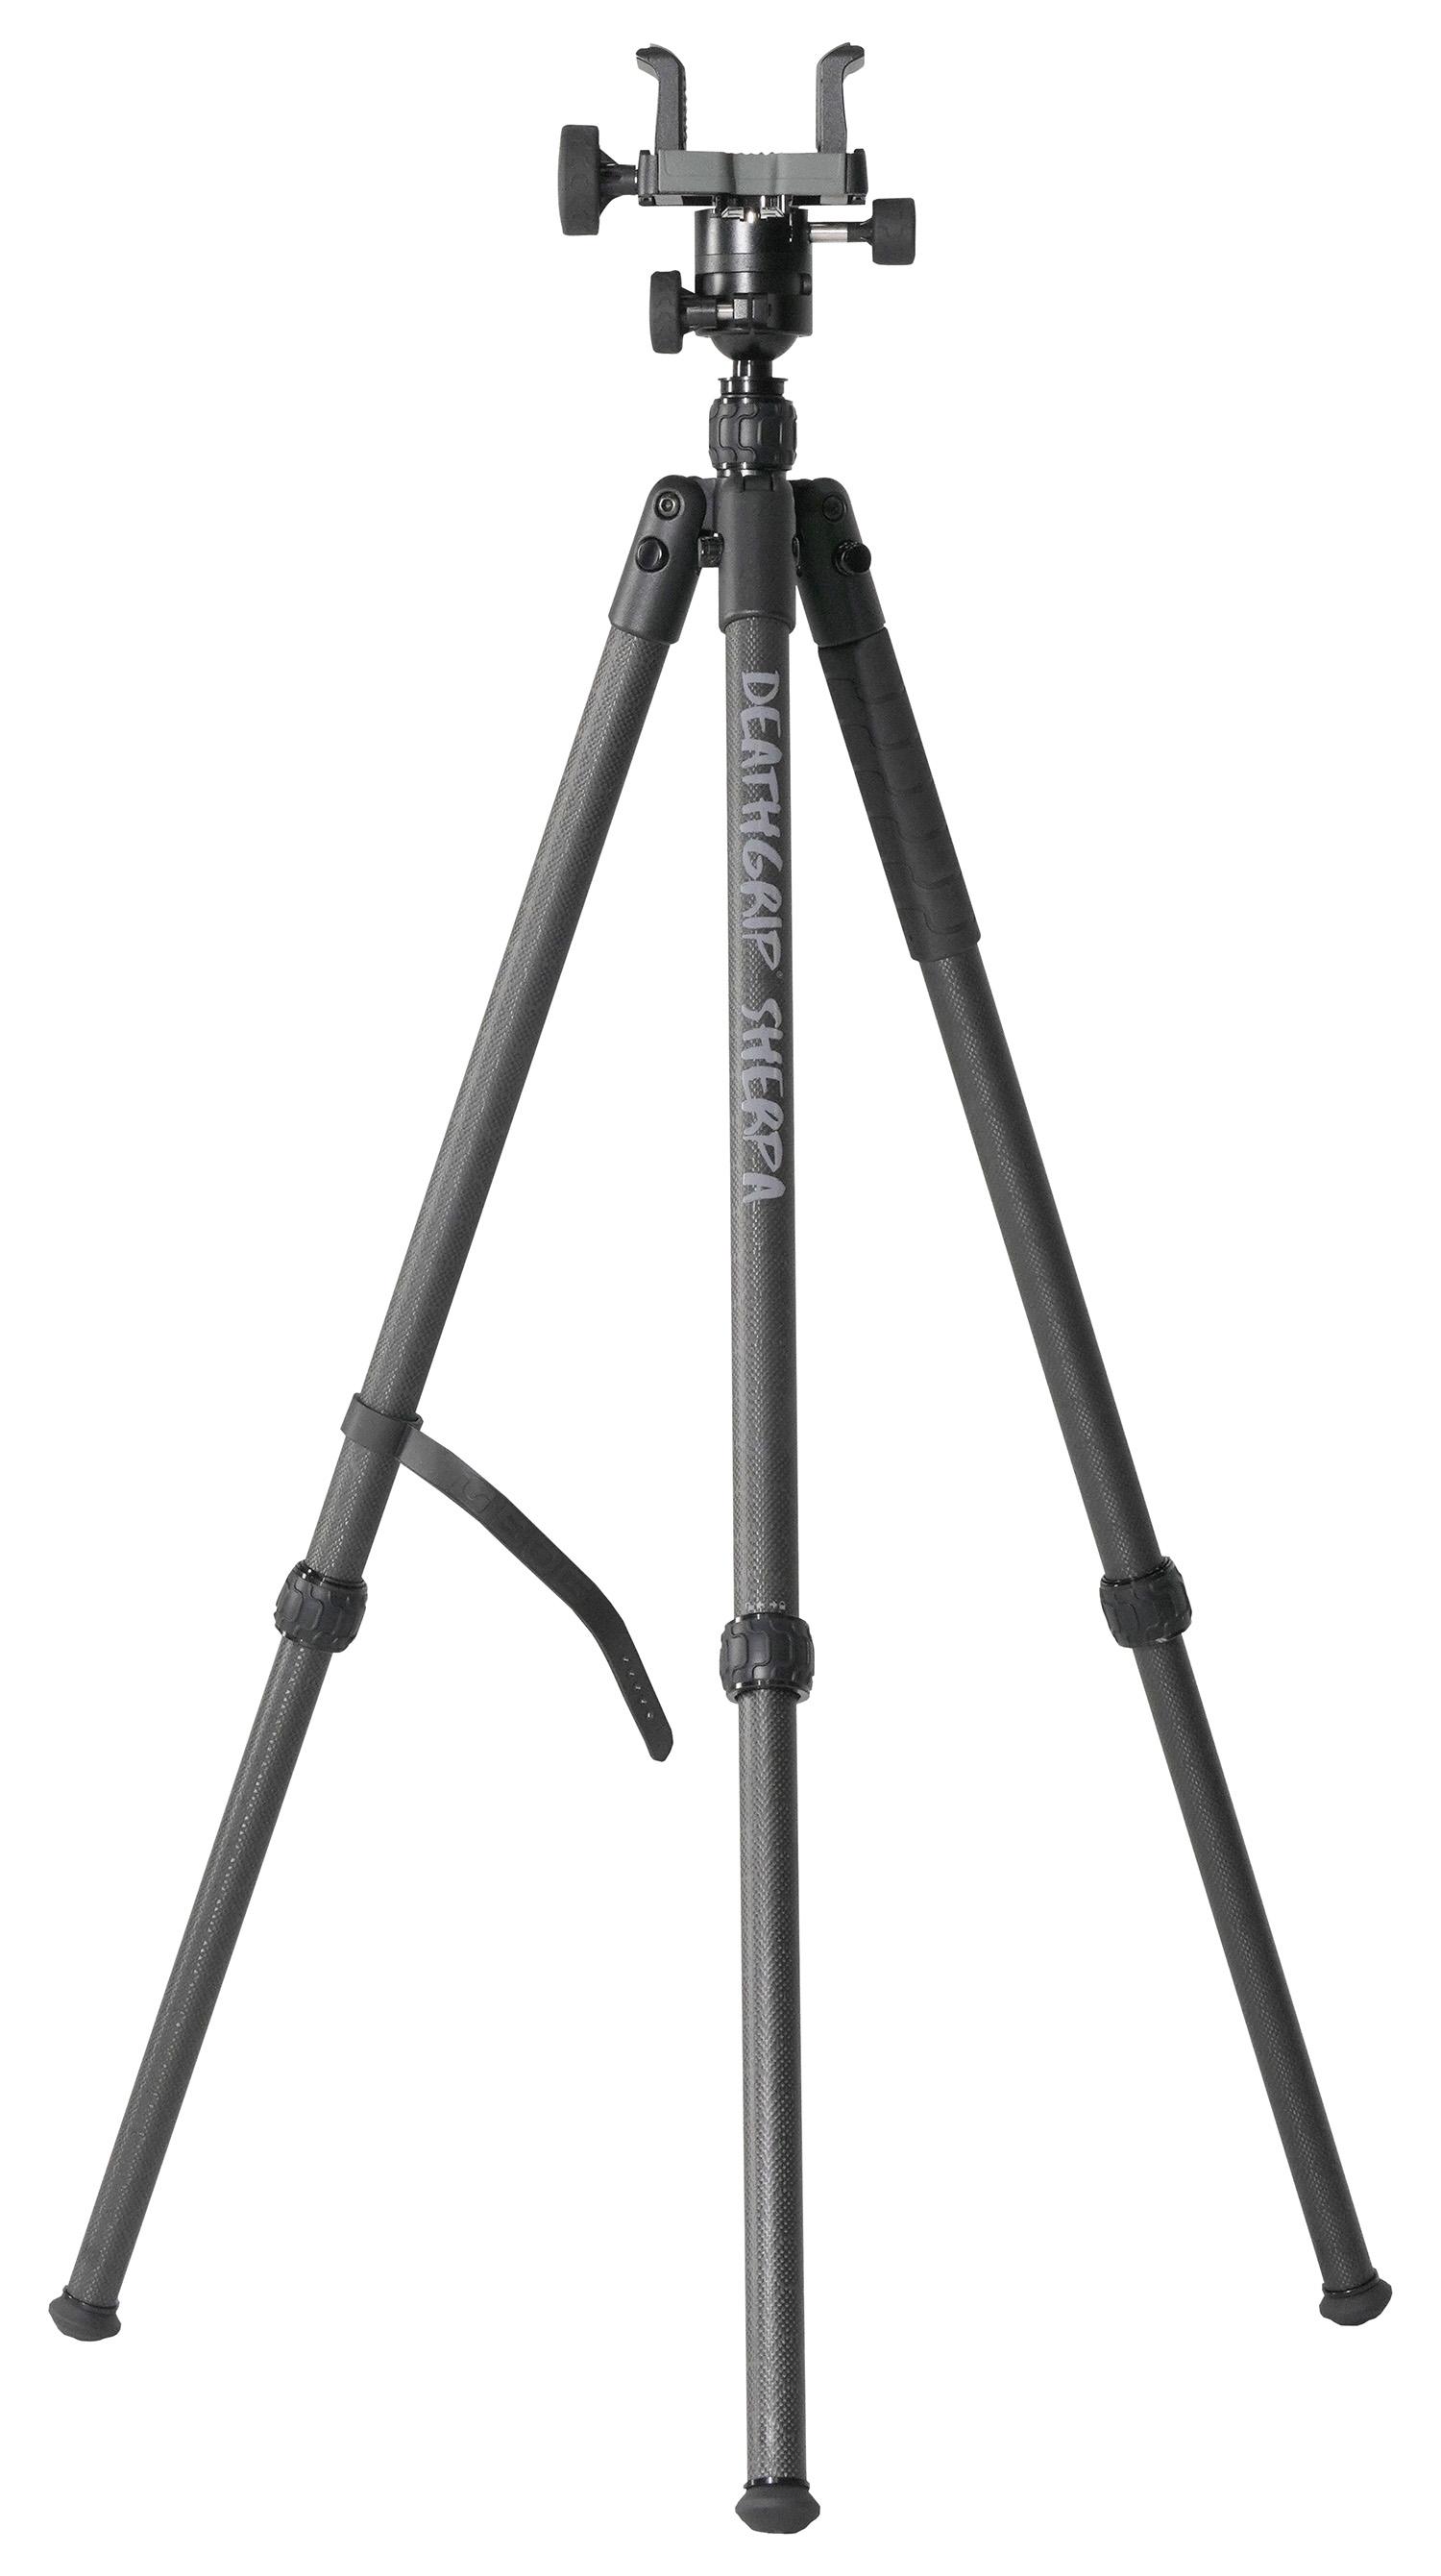  Bog- Pod 1168229 Deathgrip Sherpa Tripod With Removable Center Post Black/Carbon Fiber Legs Rubber With Removeable Spike